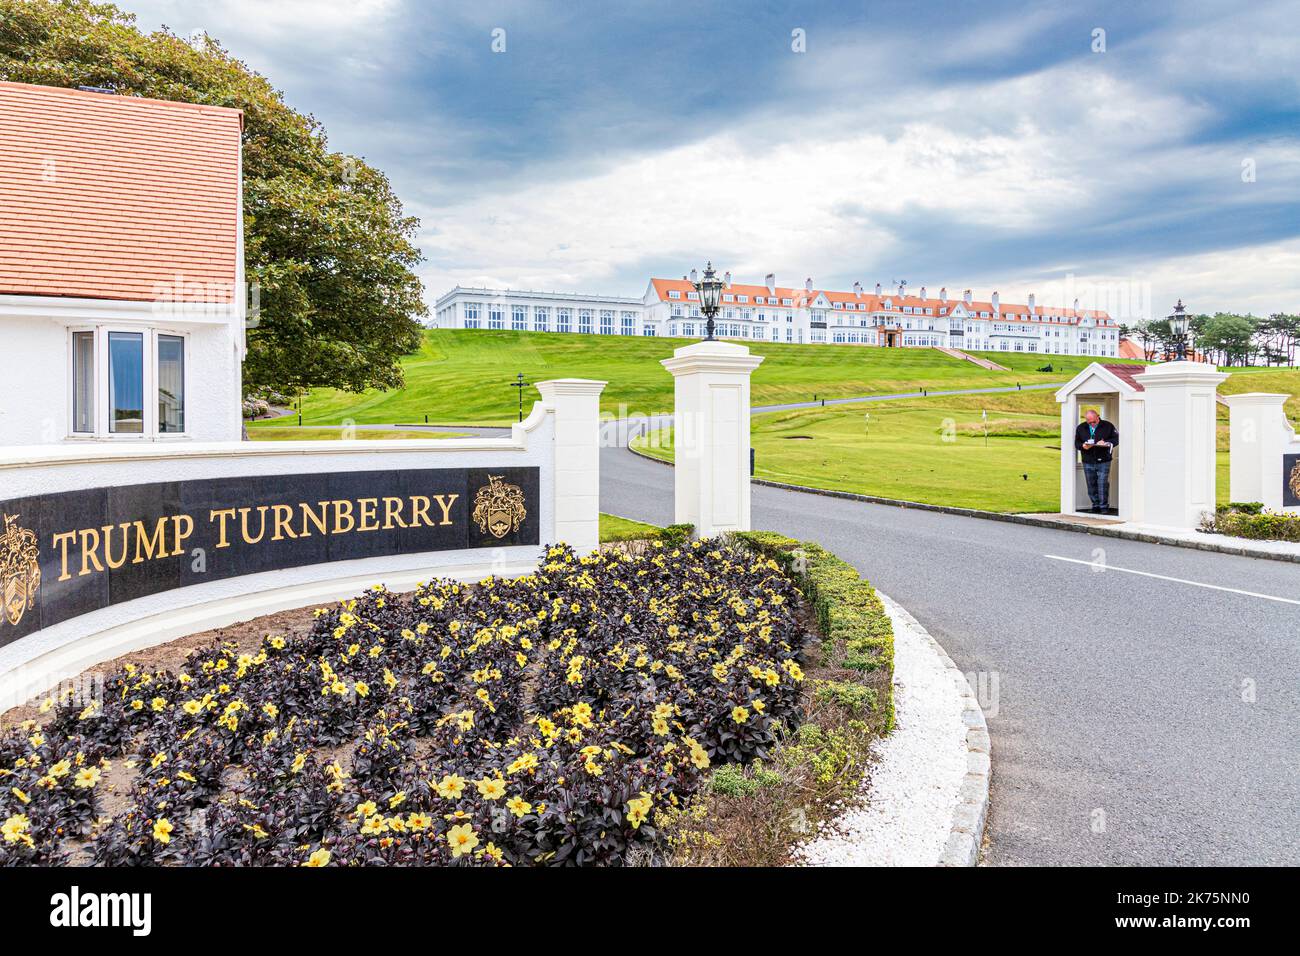 Trump Turnberry Hotel and Golf Course owned by the Trump Organisation at Turnberry near Girvan, South Ayrshire, Scotland UK Stock Photo